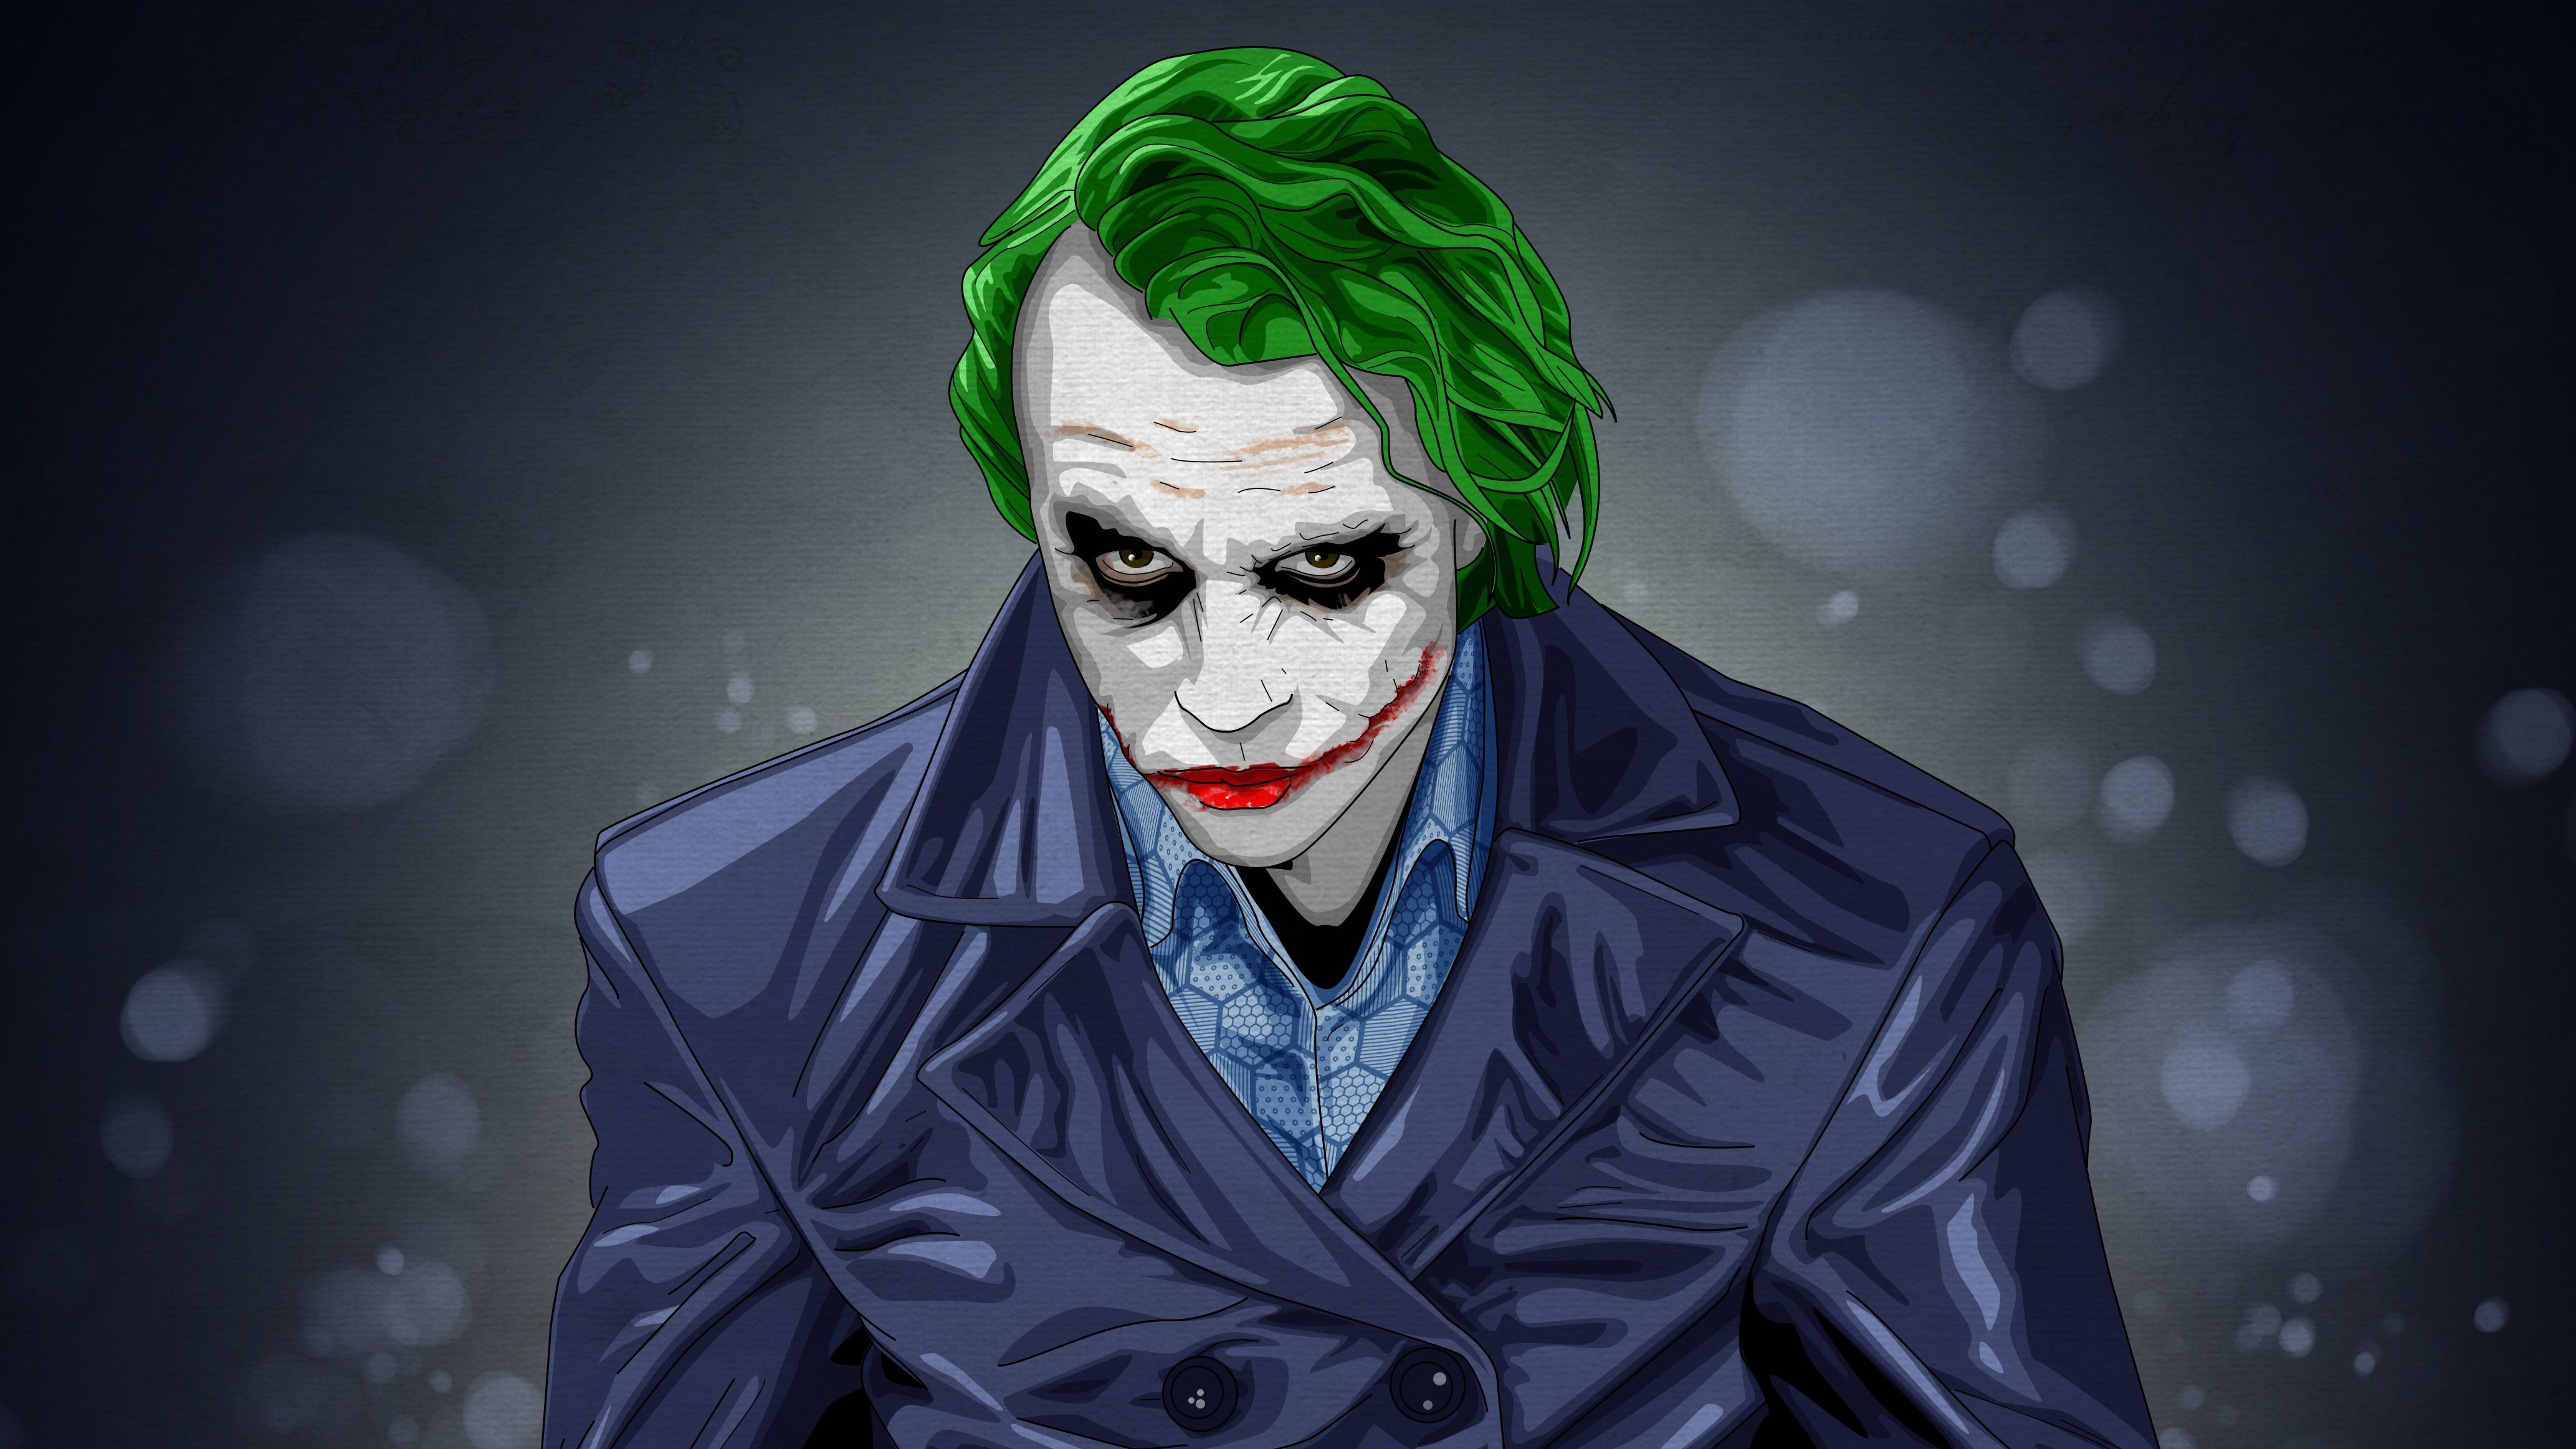 Joker Artwork 4k Hd Superheroes 4k Wallpapers Images Backgrounds Photos And Pictures